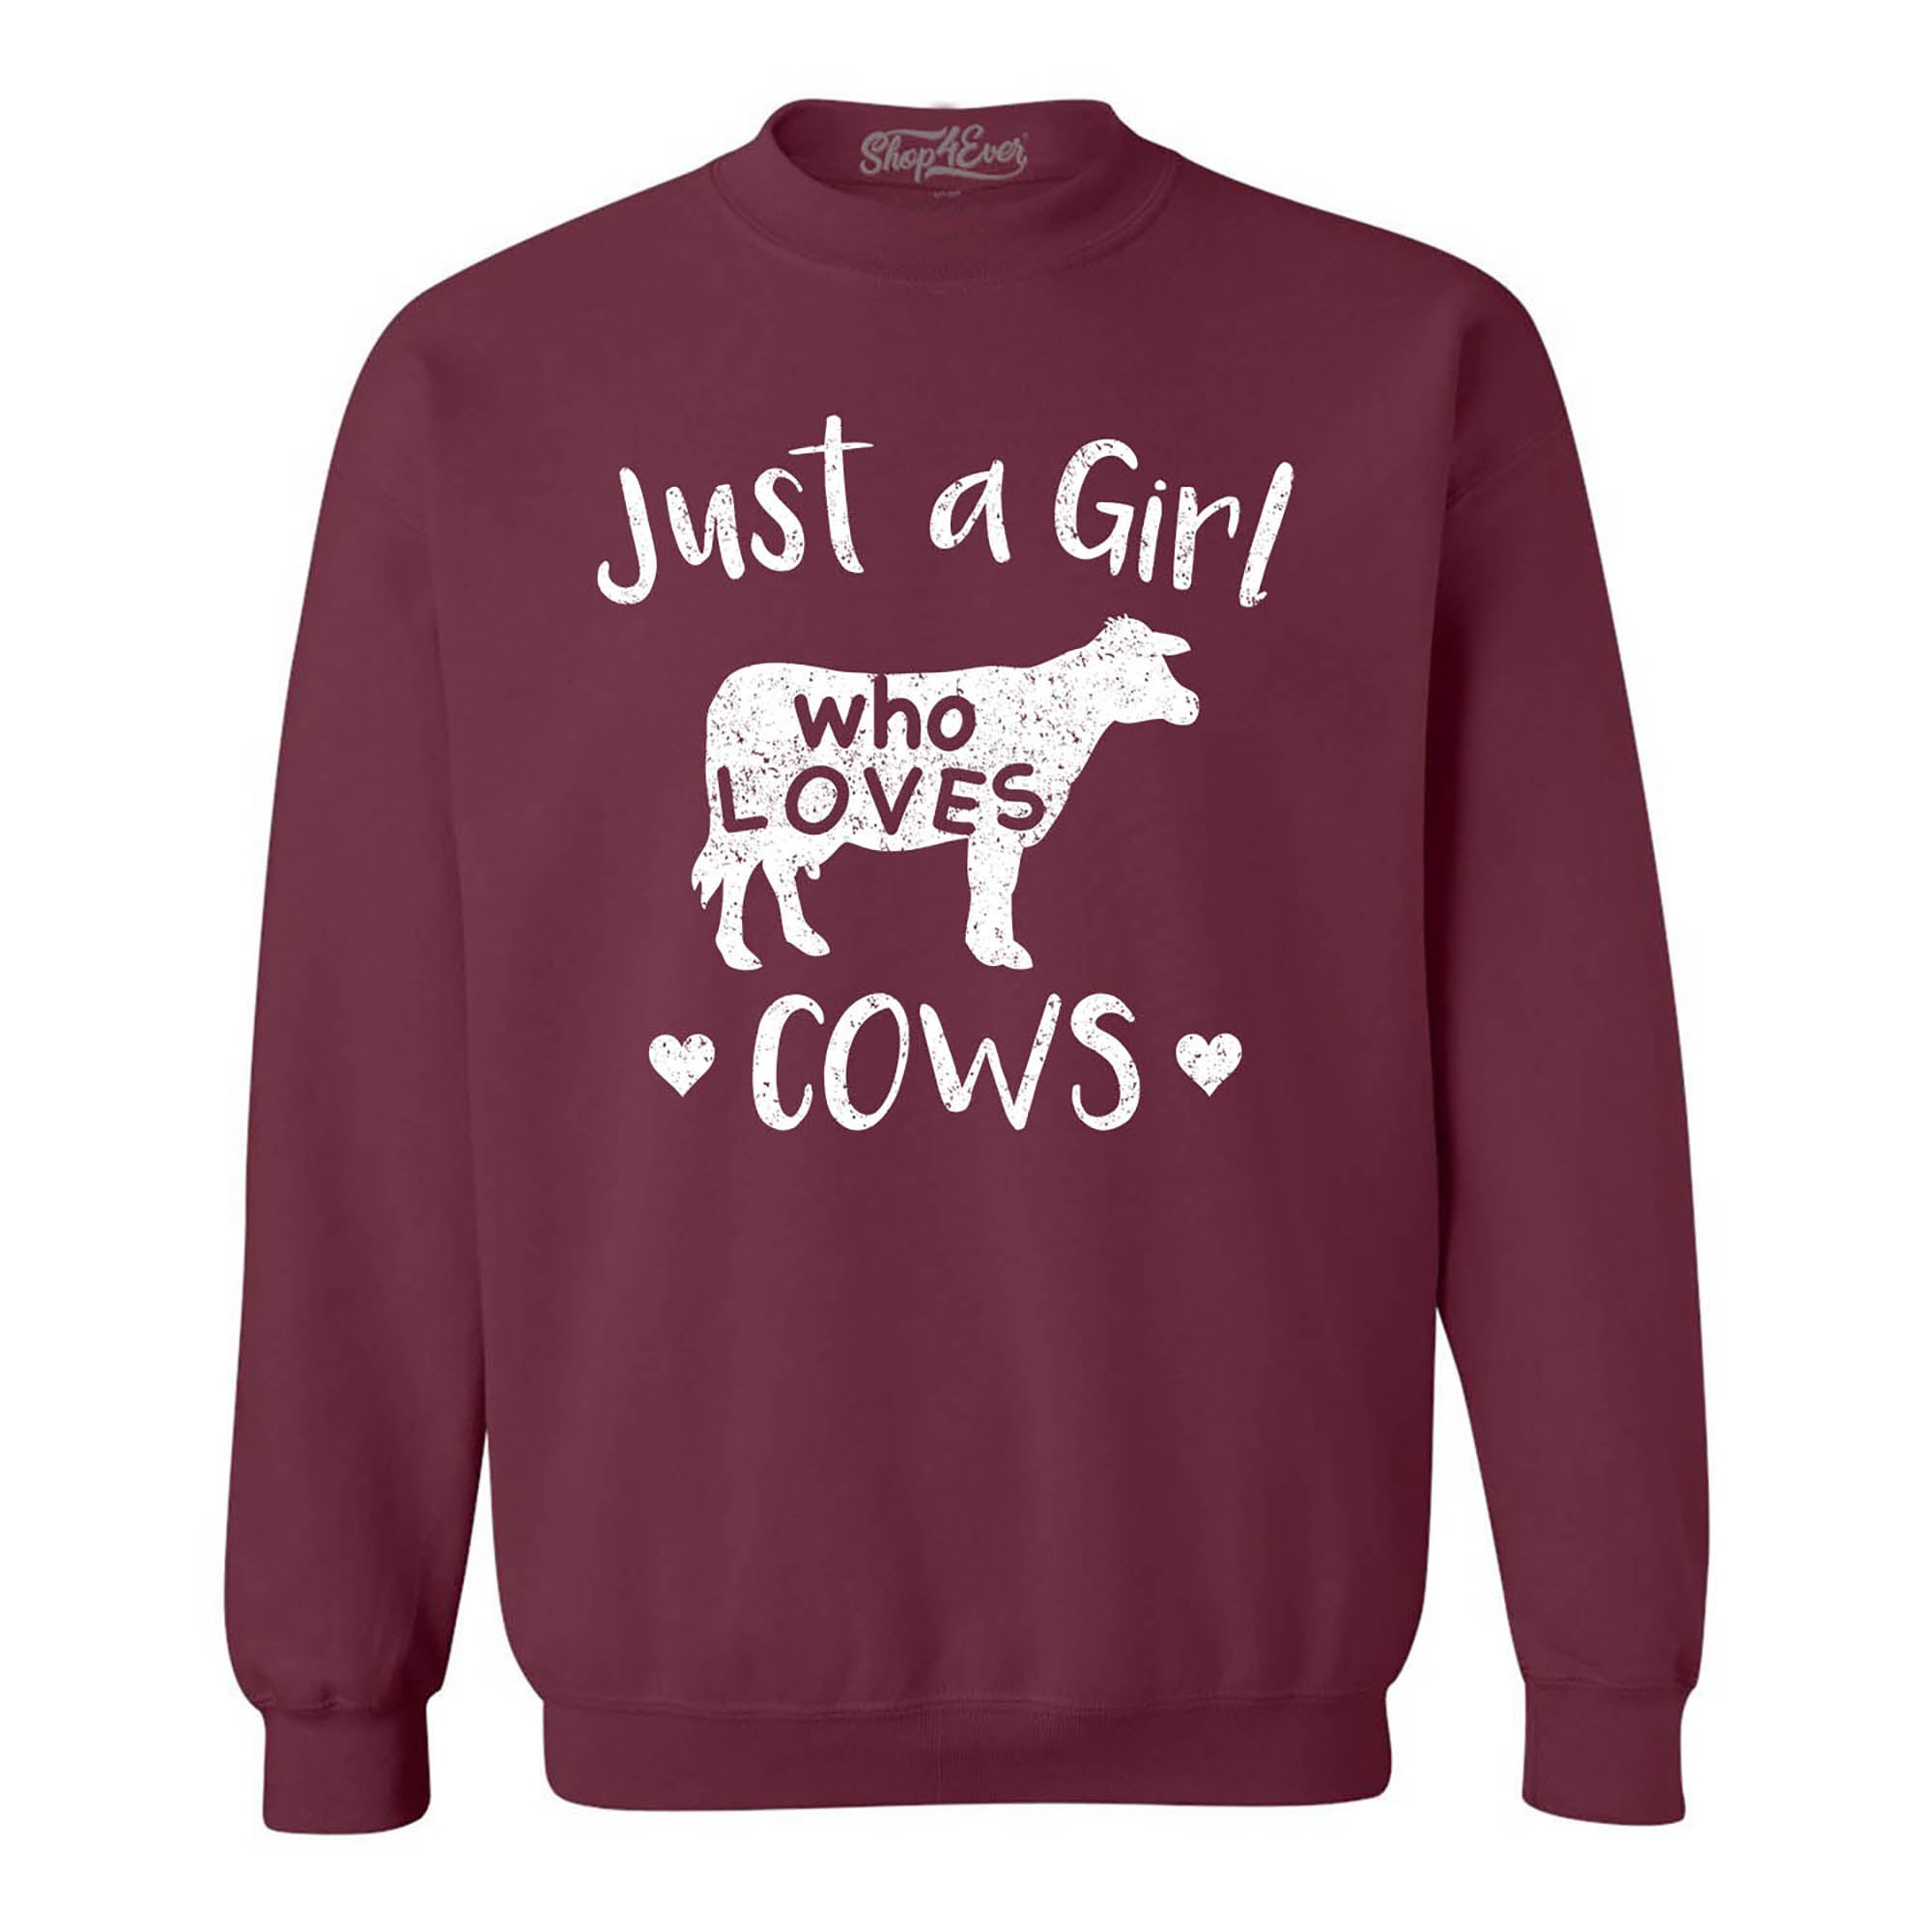 Just A Girl Who Loves Cows Crewneck Sweatshirts